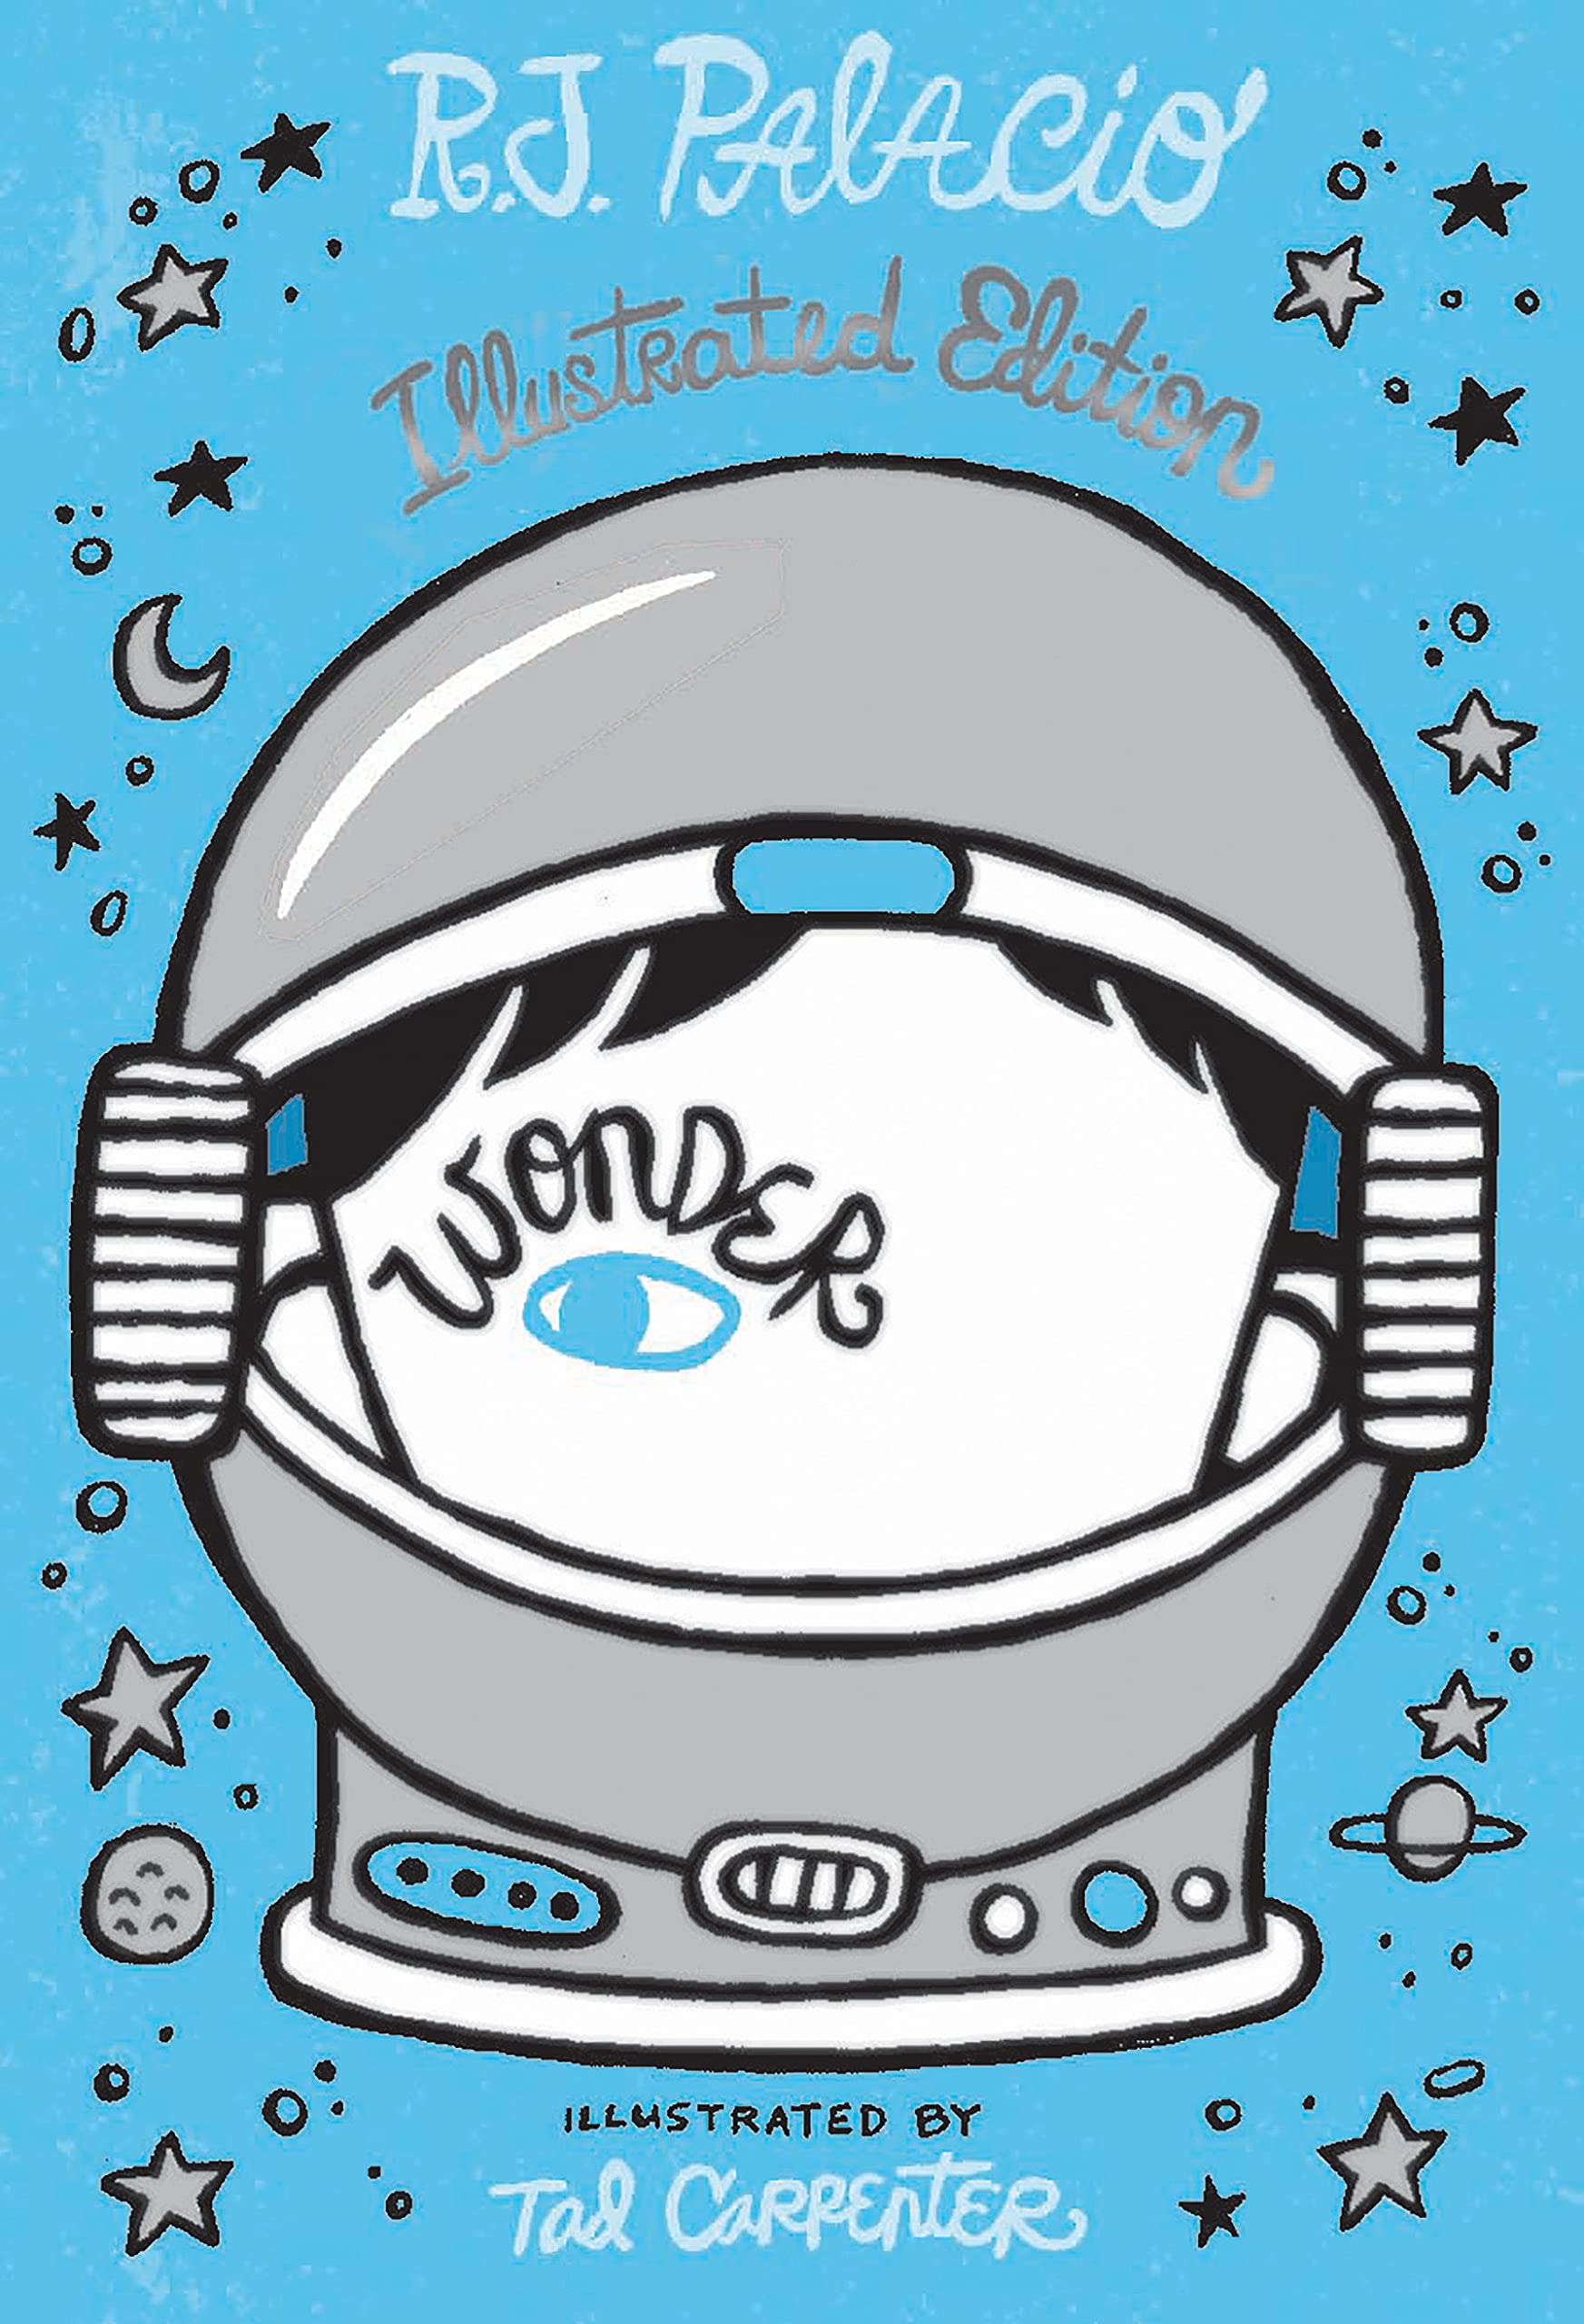 Wonder, Illustrated Edition by R.J. Palacio, illustrated by Tad Carpenter |  Youth Services Book Review